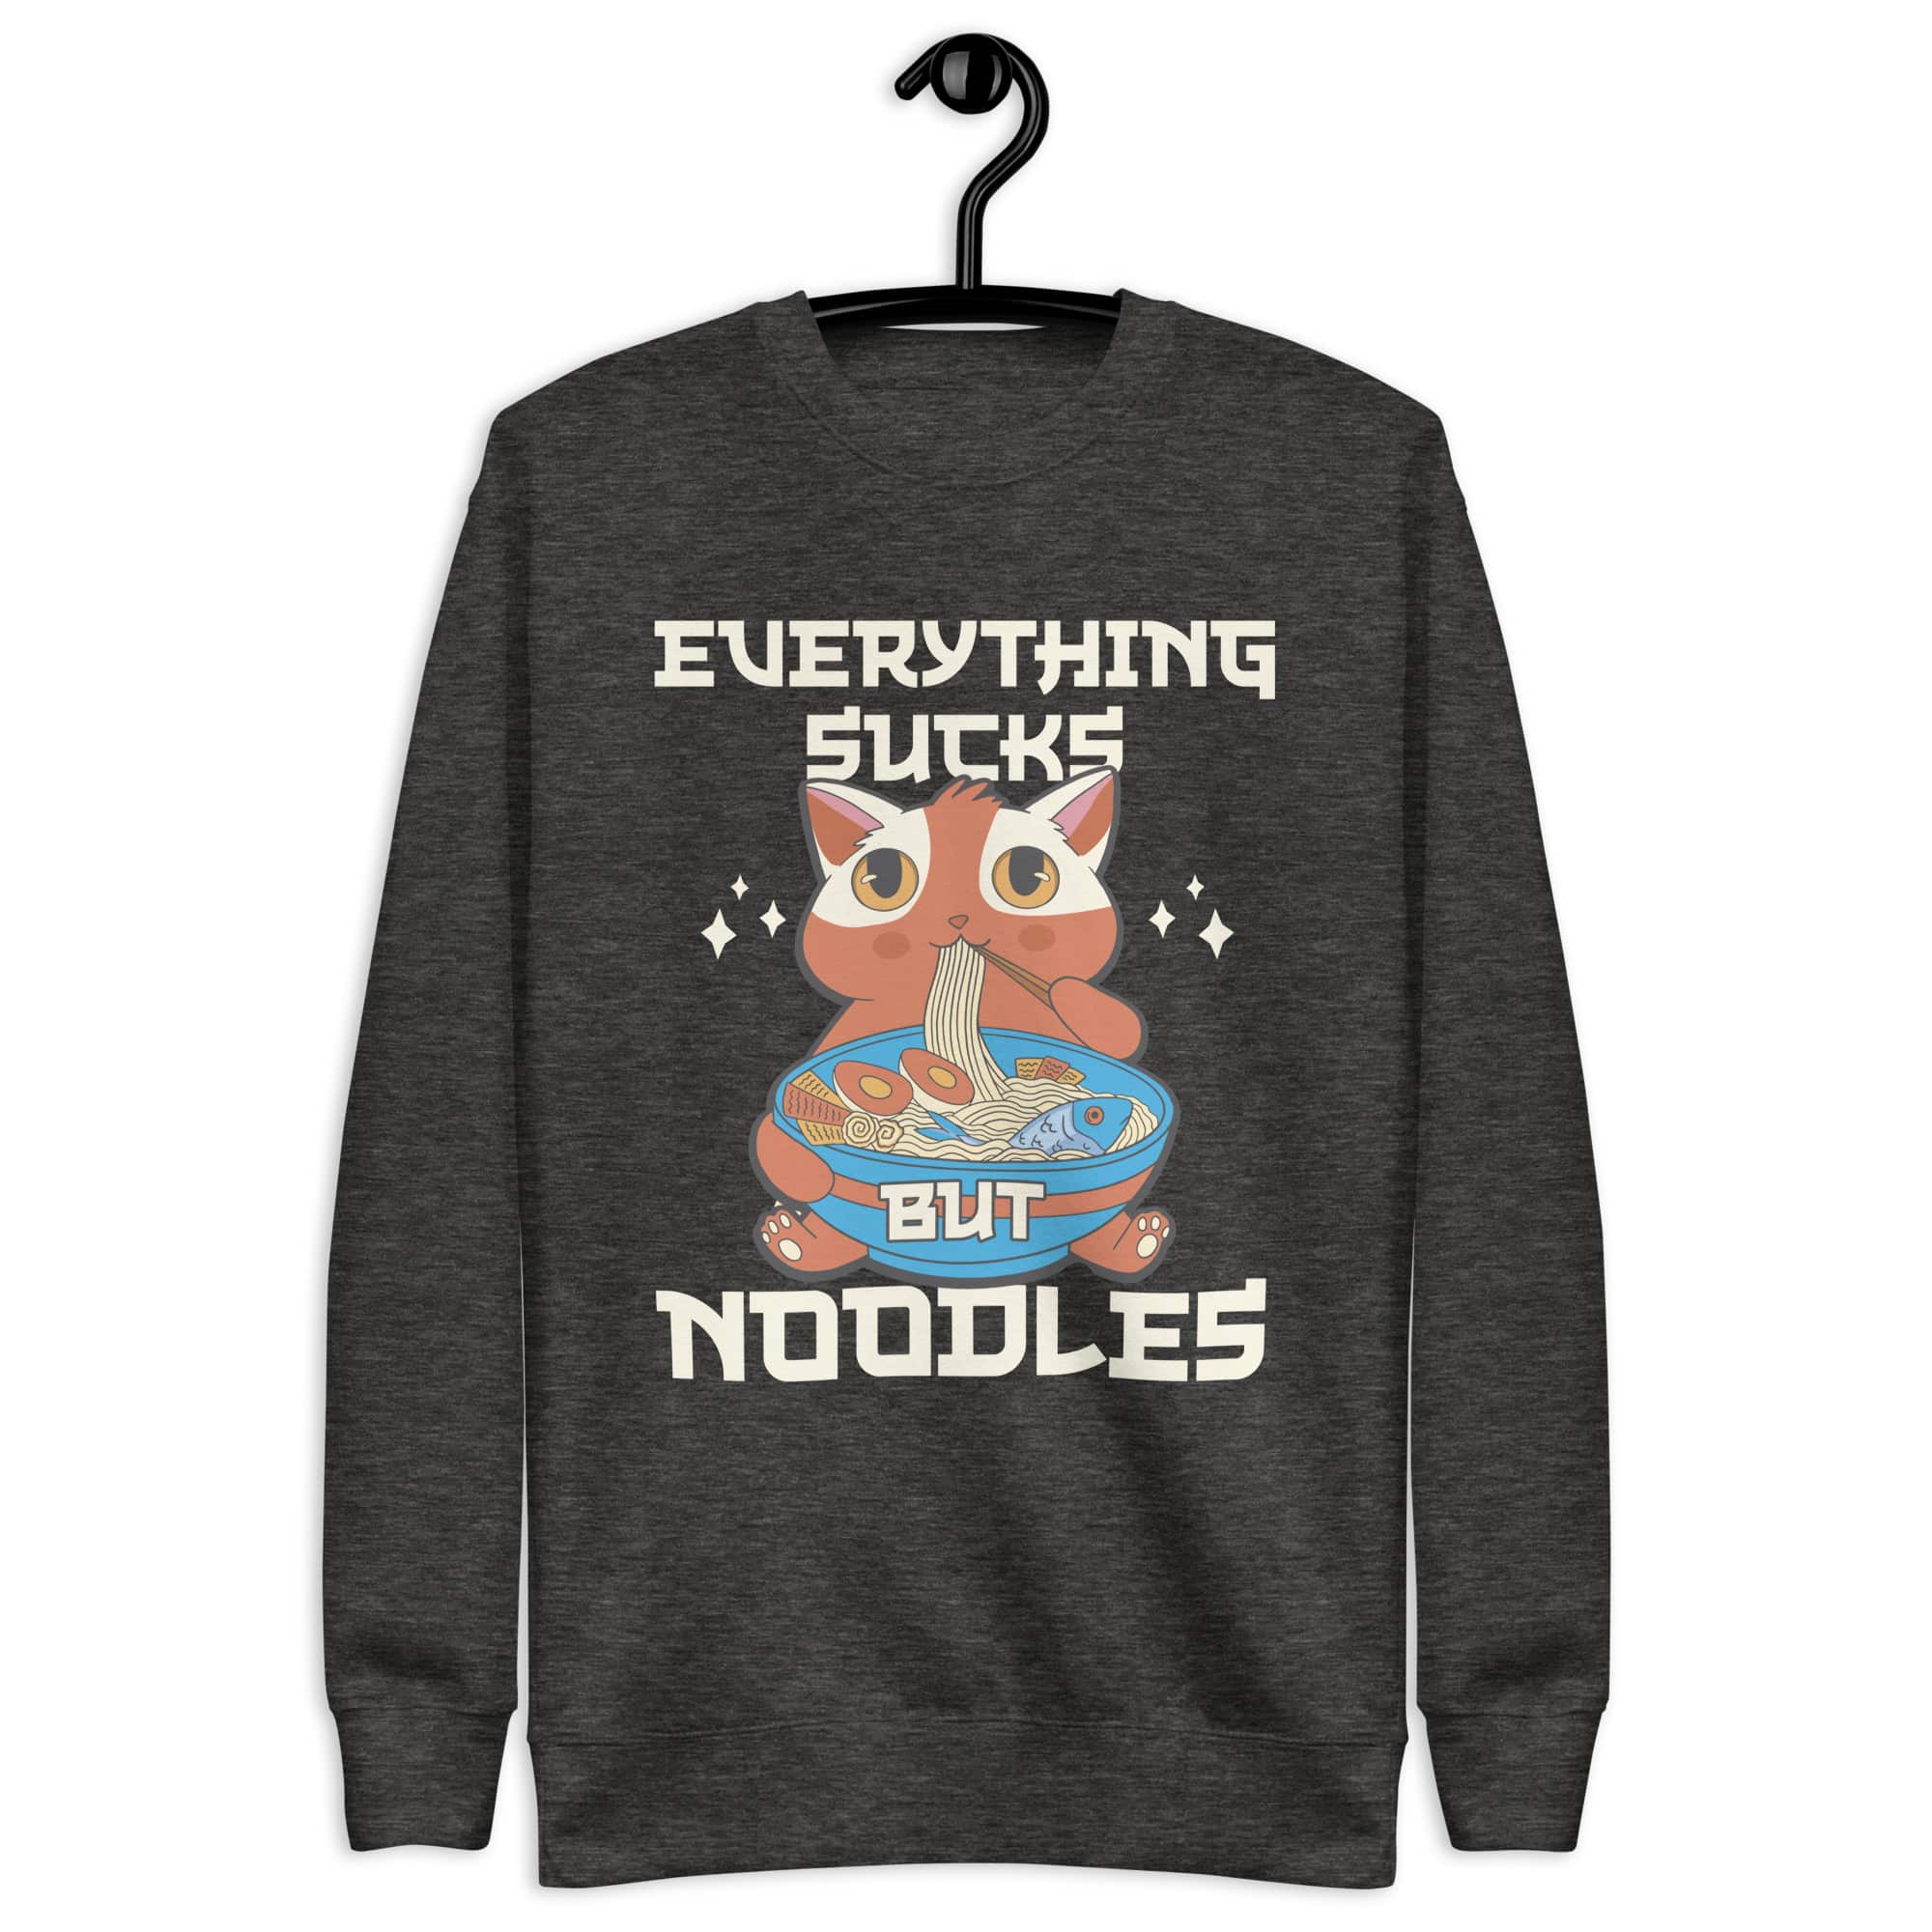 Everything Sucks But Noodles Anime Sweatshirt Video game store Gaming merchandise Gaming accessories shop Online gaming store Video game shop near me Gaming console store PC gaming store Gaming gear shop Retro gaming shop Board game shop Anime merchandise Anime store online Japanese anime shop Anime figurines Manga shop Anime DVDs Anime accessories Anime apparel Anime collectibles Anime gifts